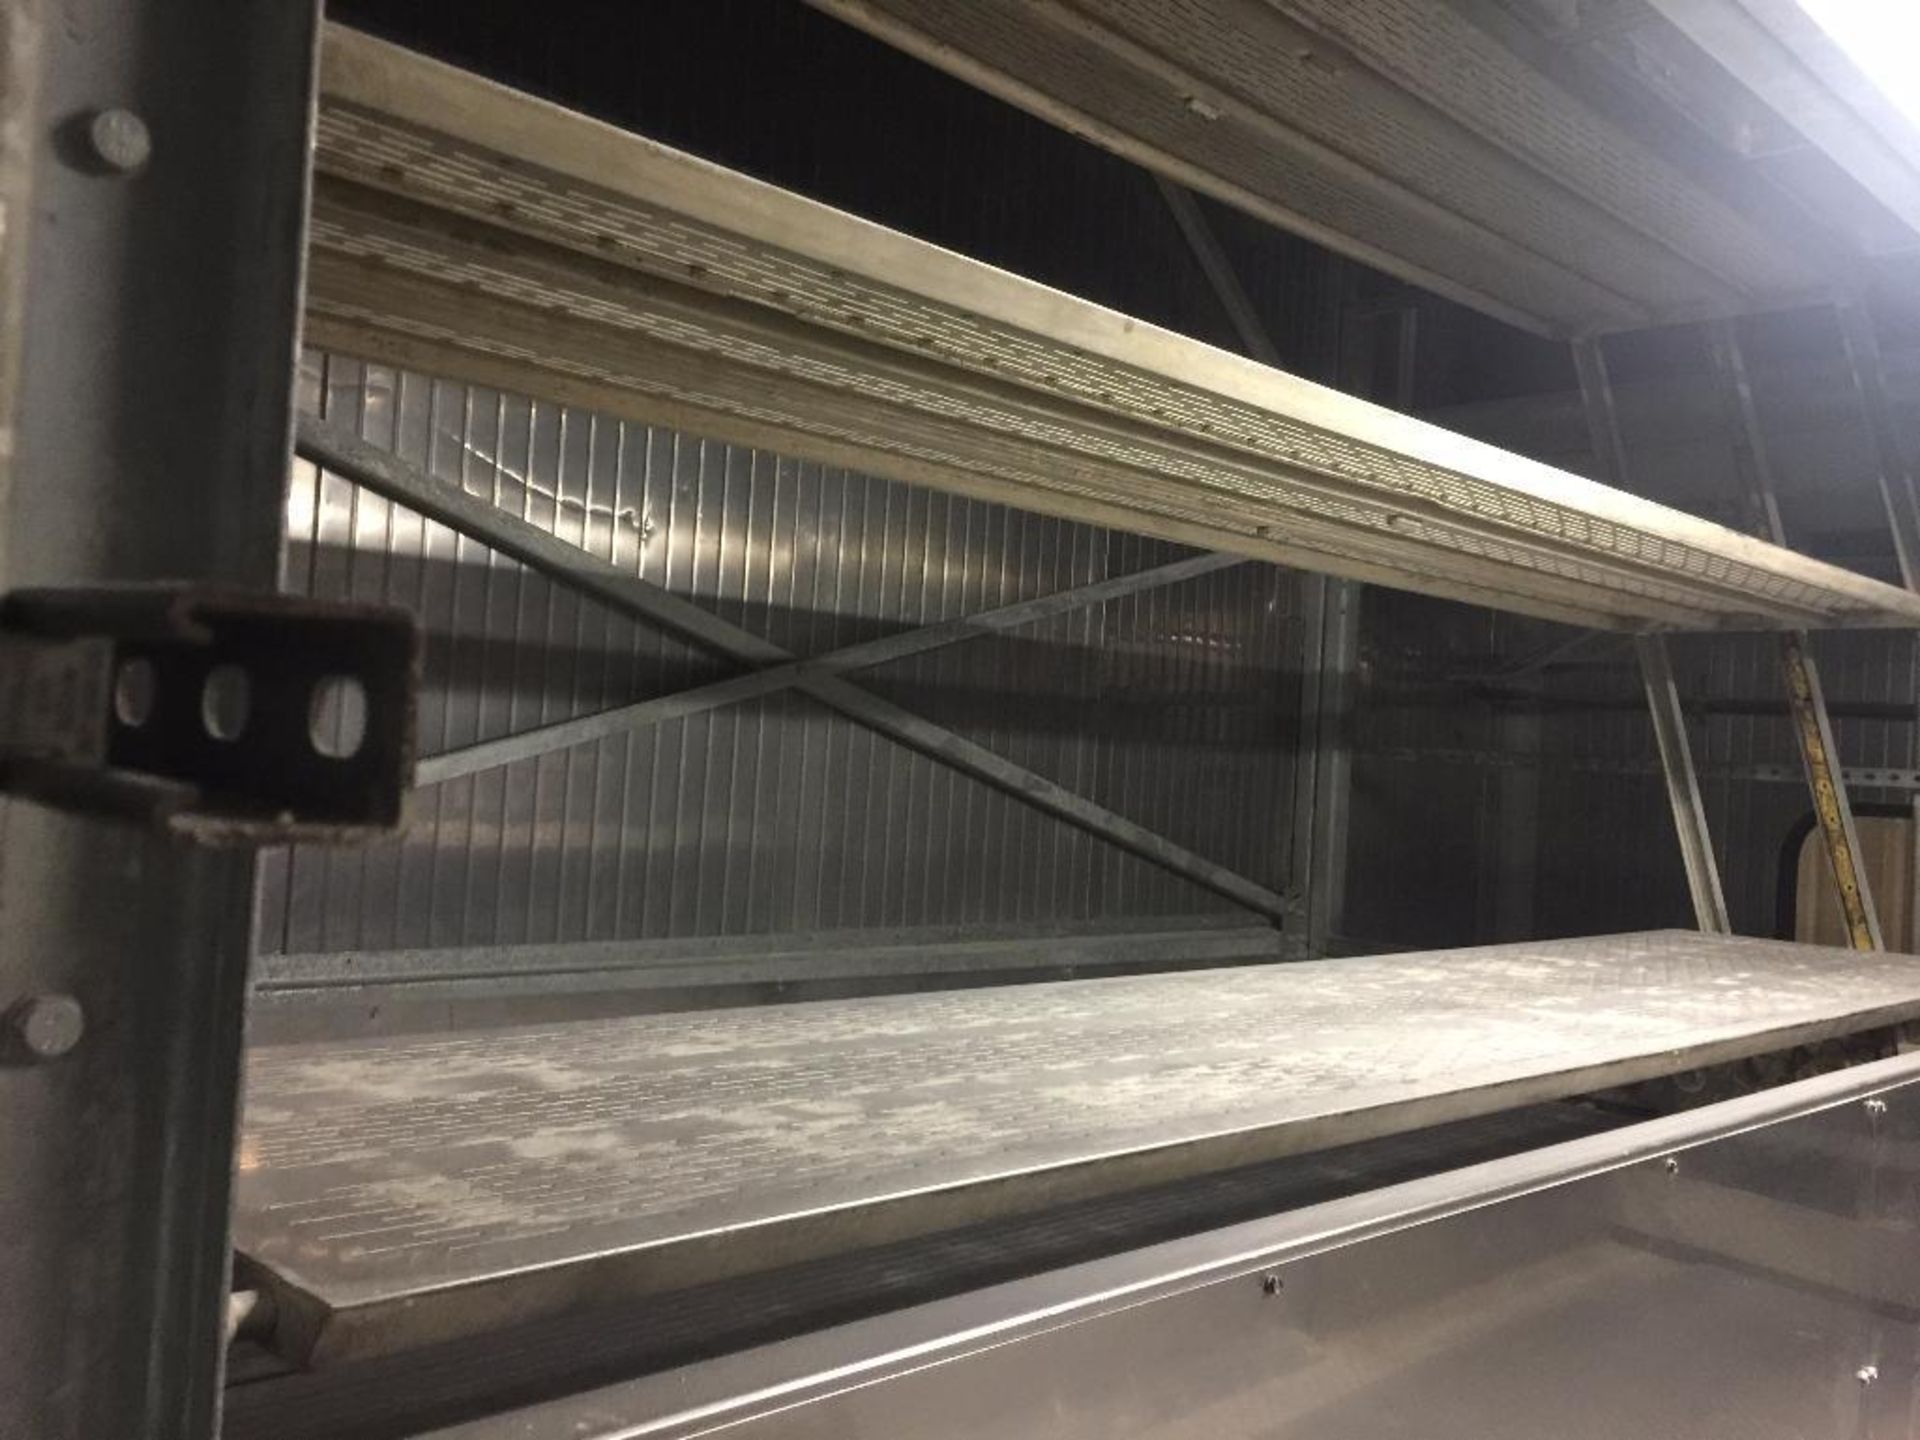 1998 Sasib proof box, 138 in. wide x 150 ft. long x 6 rows, 5 hr. proof time, each slat is 18 in. wi - Image 16 of 36